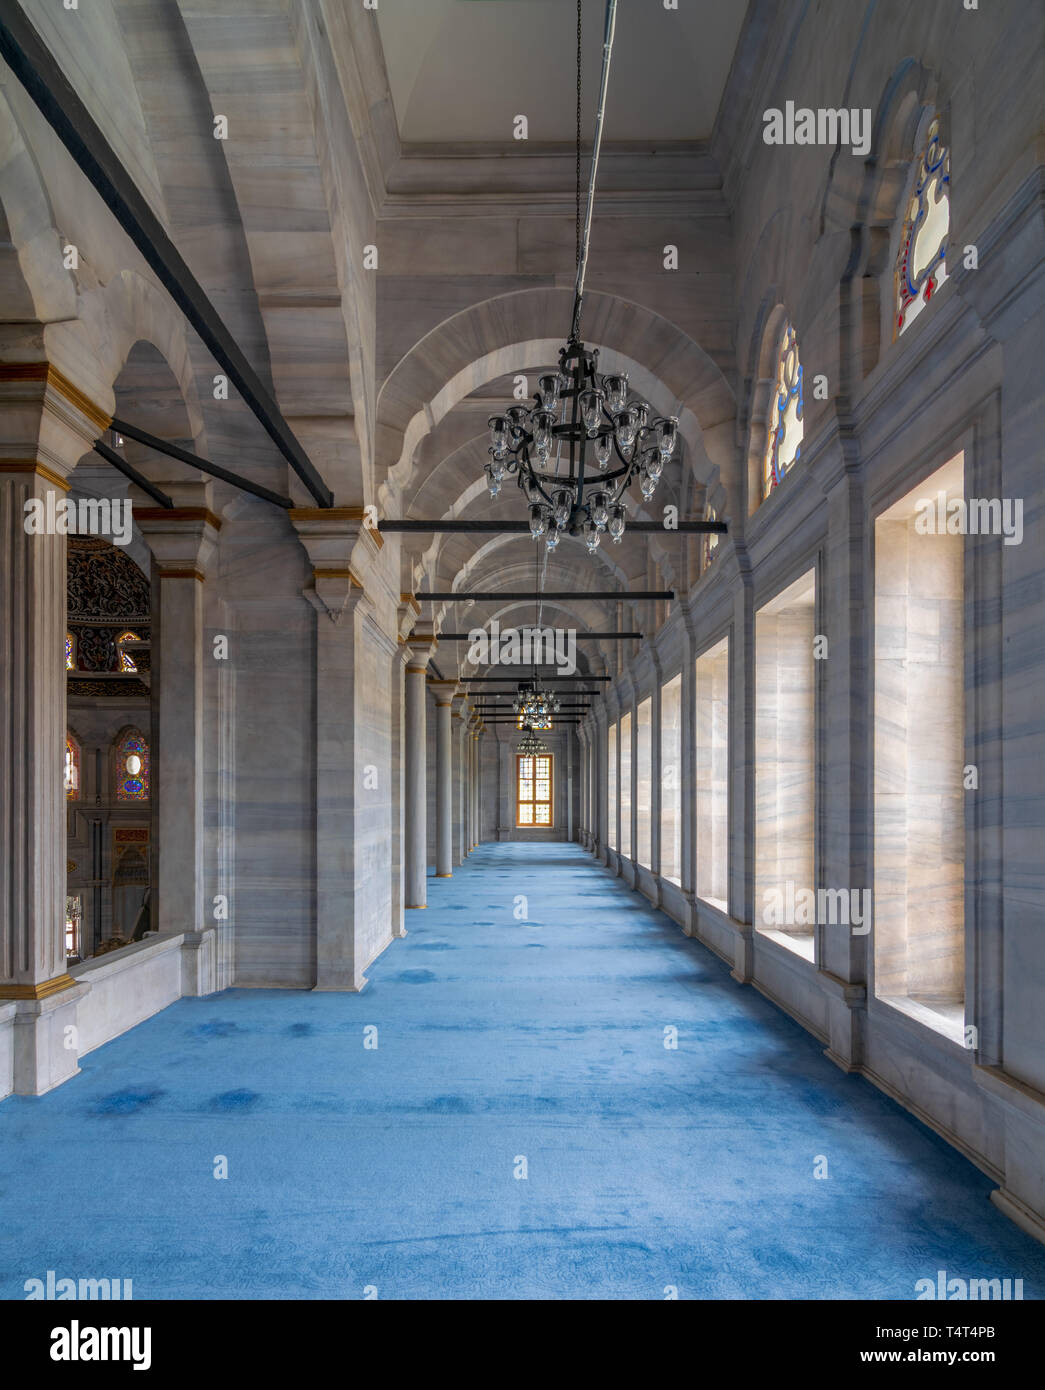 Passage in Nuruosmaniye Mosque, a public Ottoman Baroque style mosque, with columns, arches and floor covered with blue carpet lighted by side windows Stock Photo